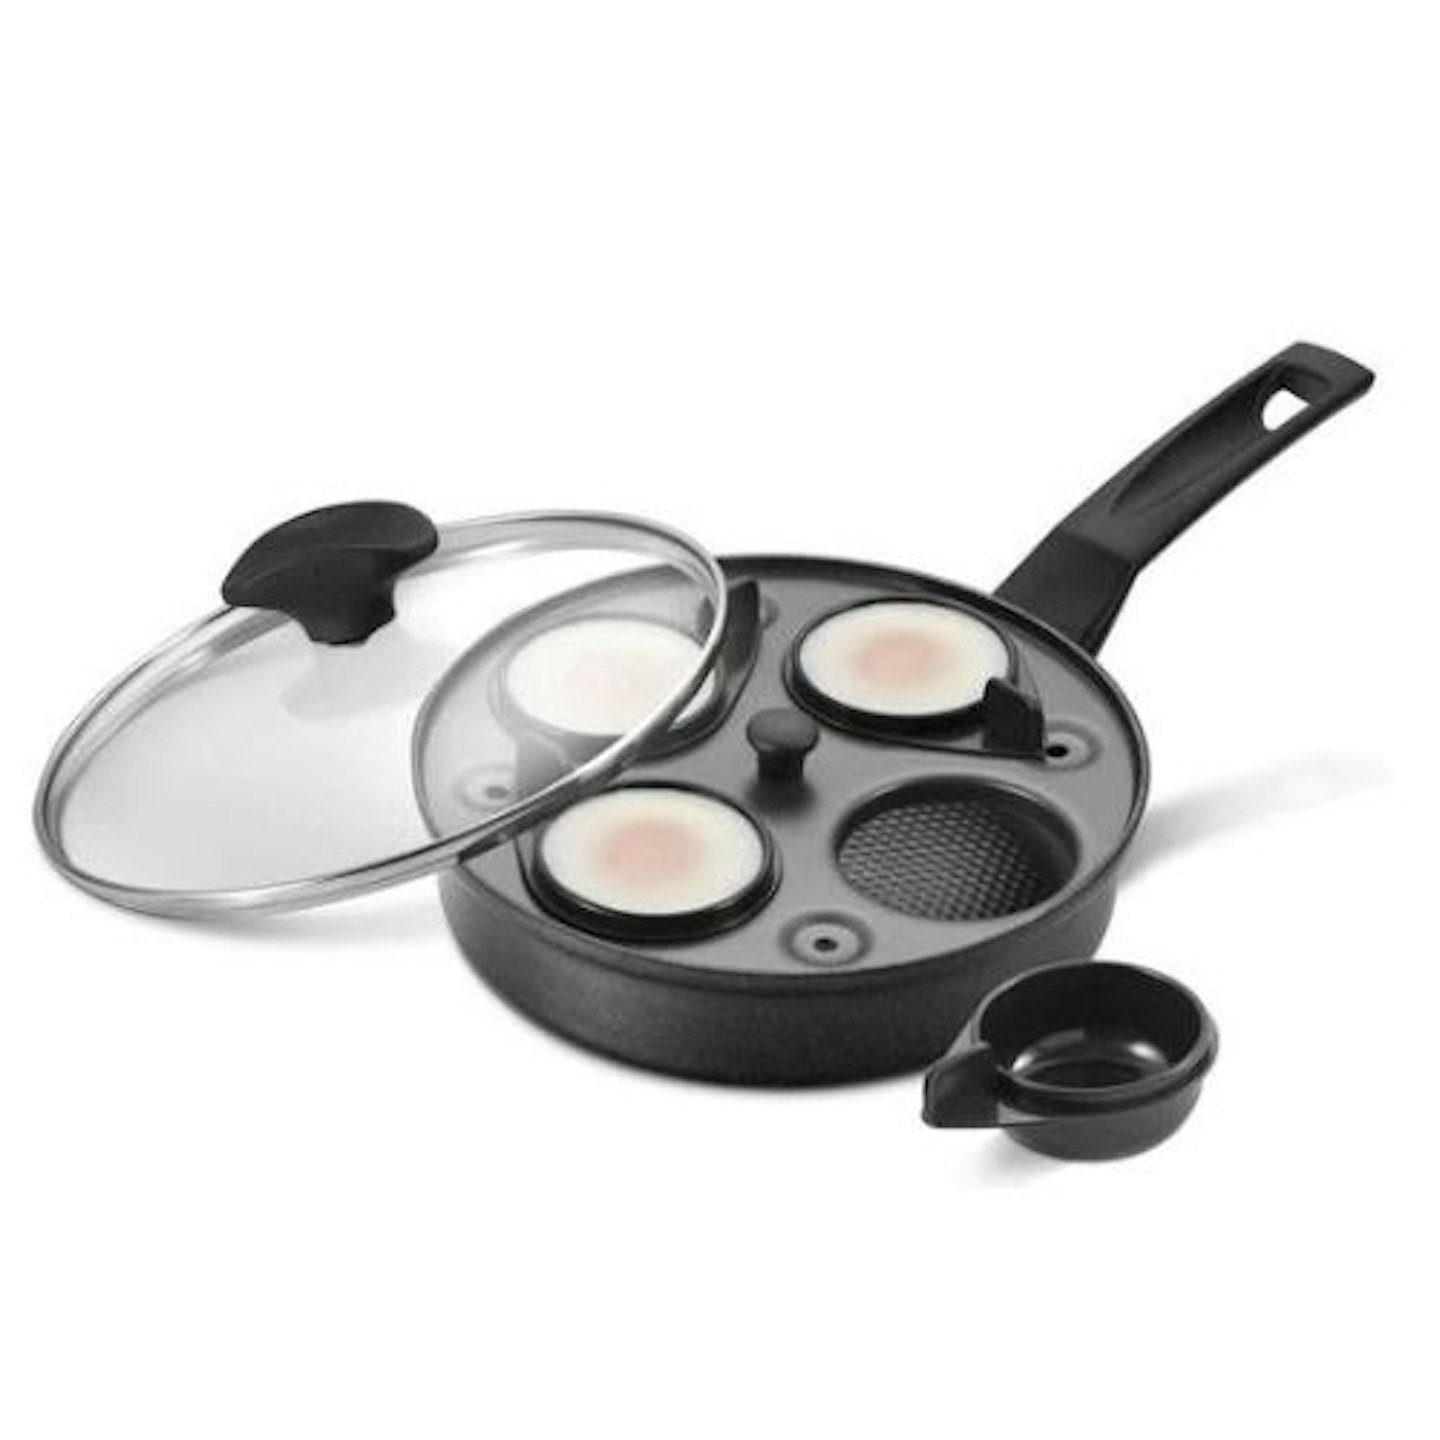 Eggssentials Egg Poacher Pan Nonstick Coating - Poached Egg Cooker,  Stainless